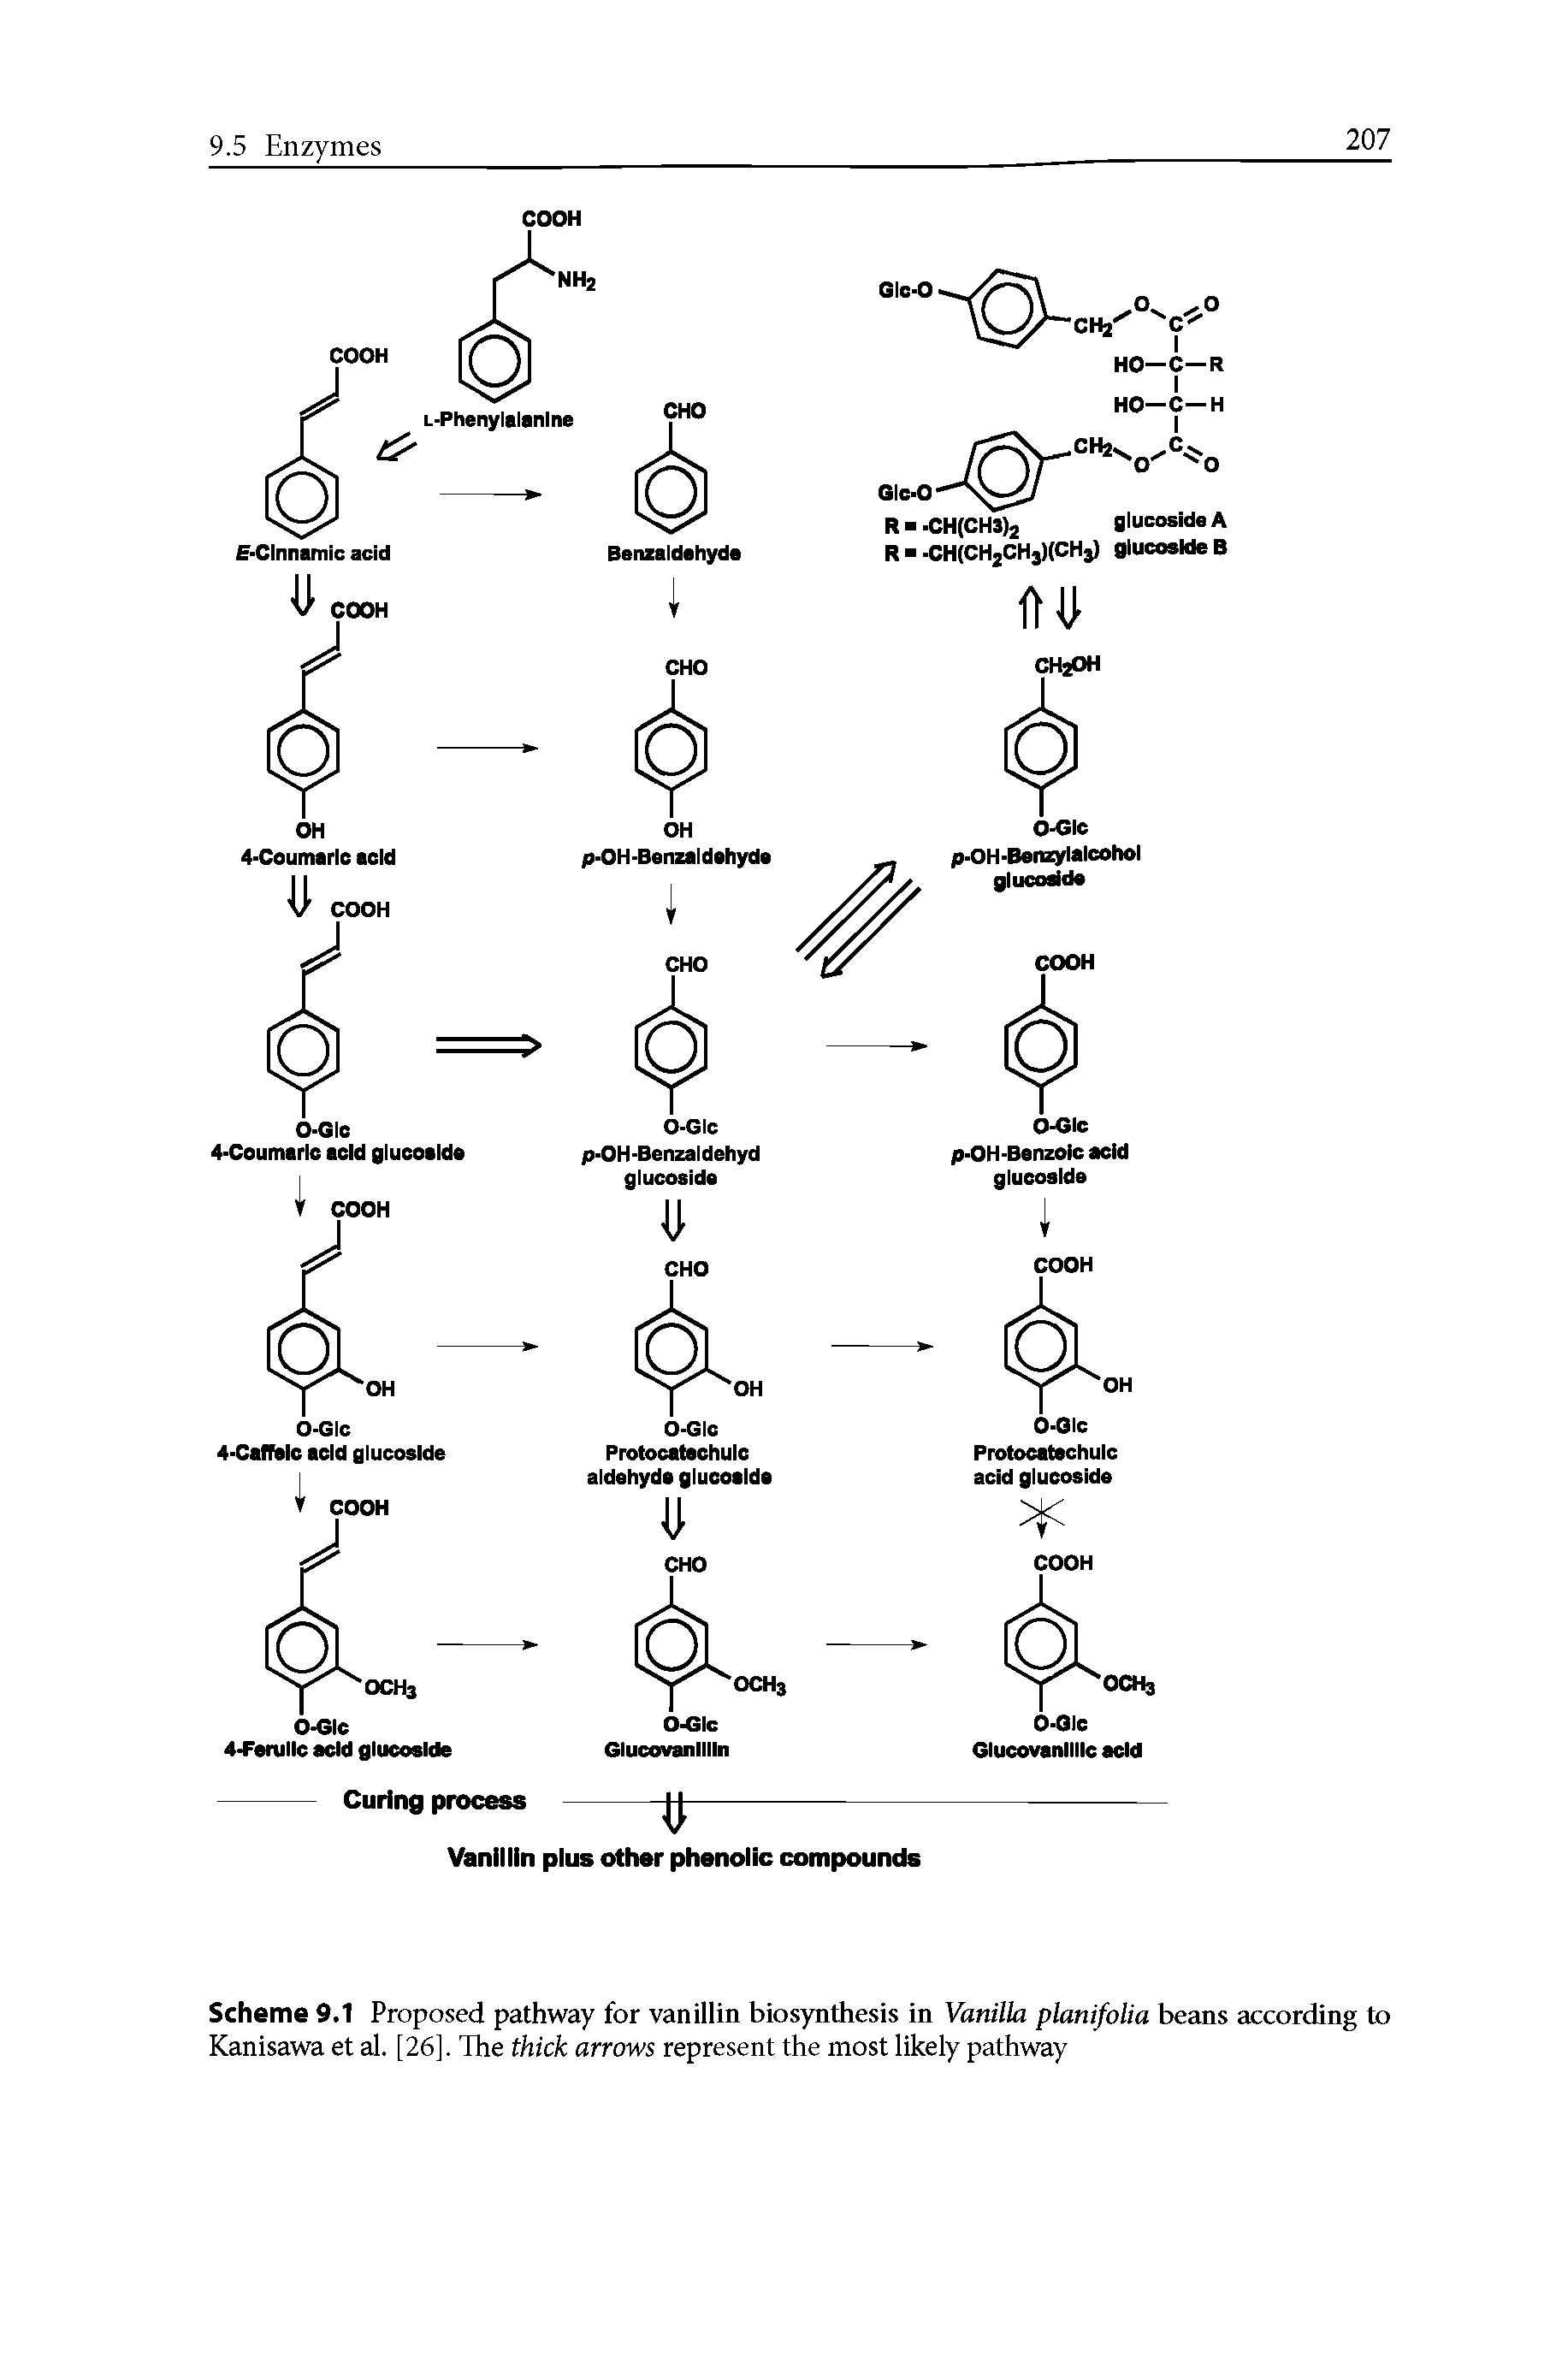 Scheme 9.1 Proposed pathway for vanillin biosynthesis in Vanilla planifolia beans according to Kanisawa et al. [26]. The thick arrows represent the most likely pathway...